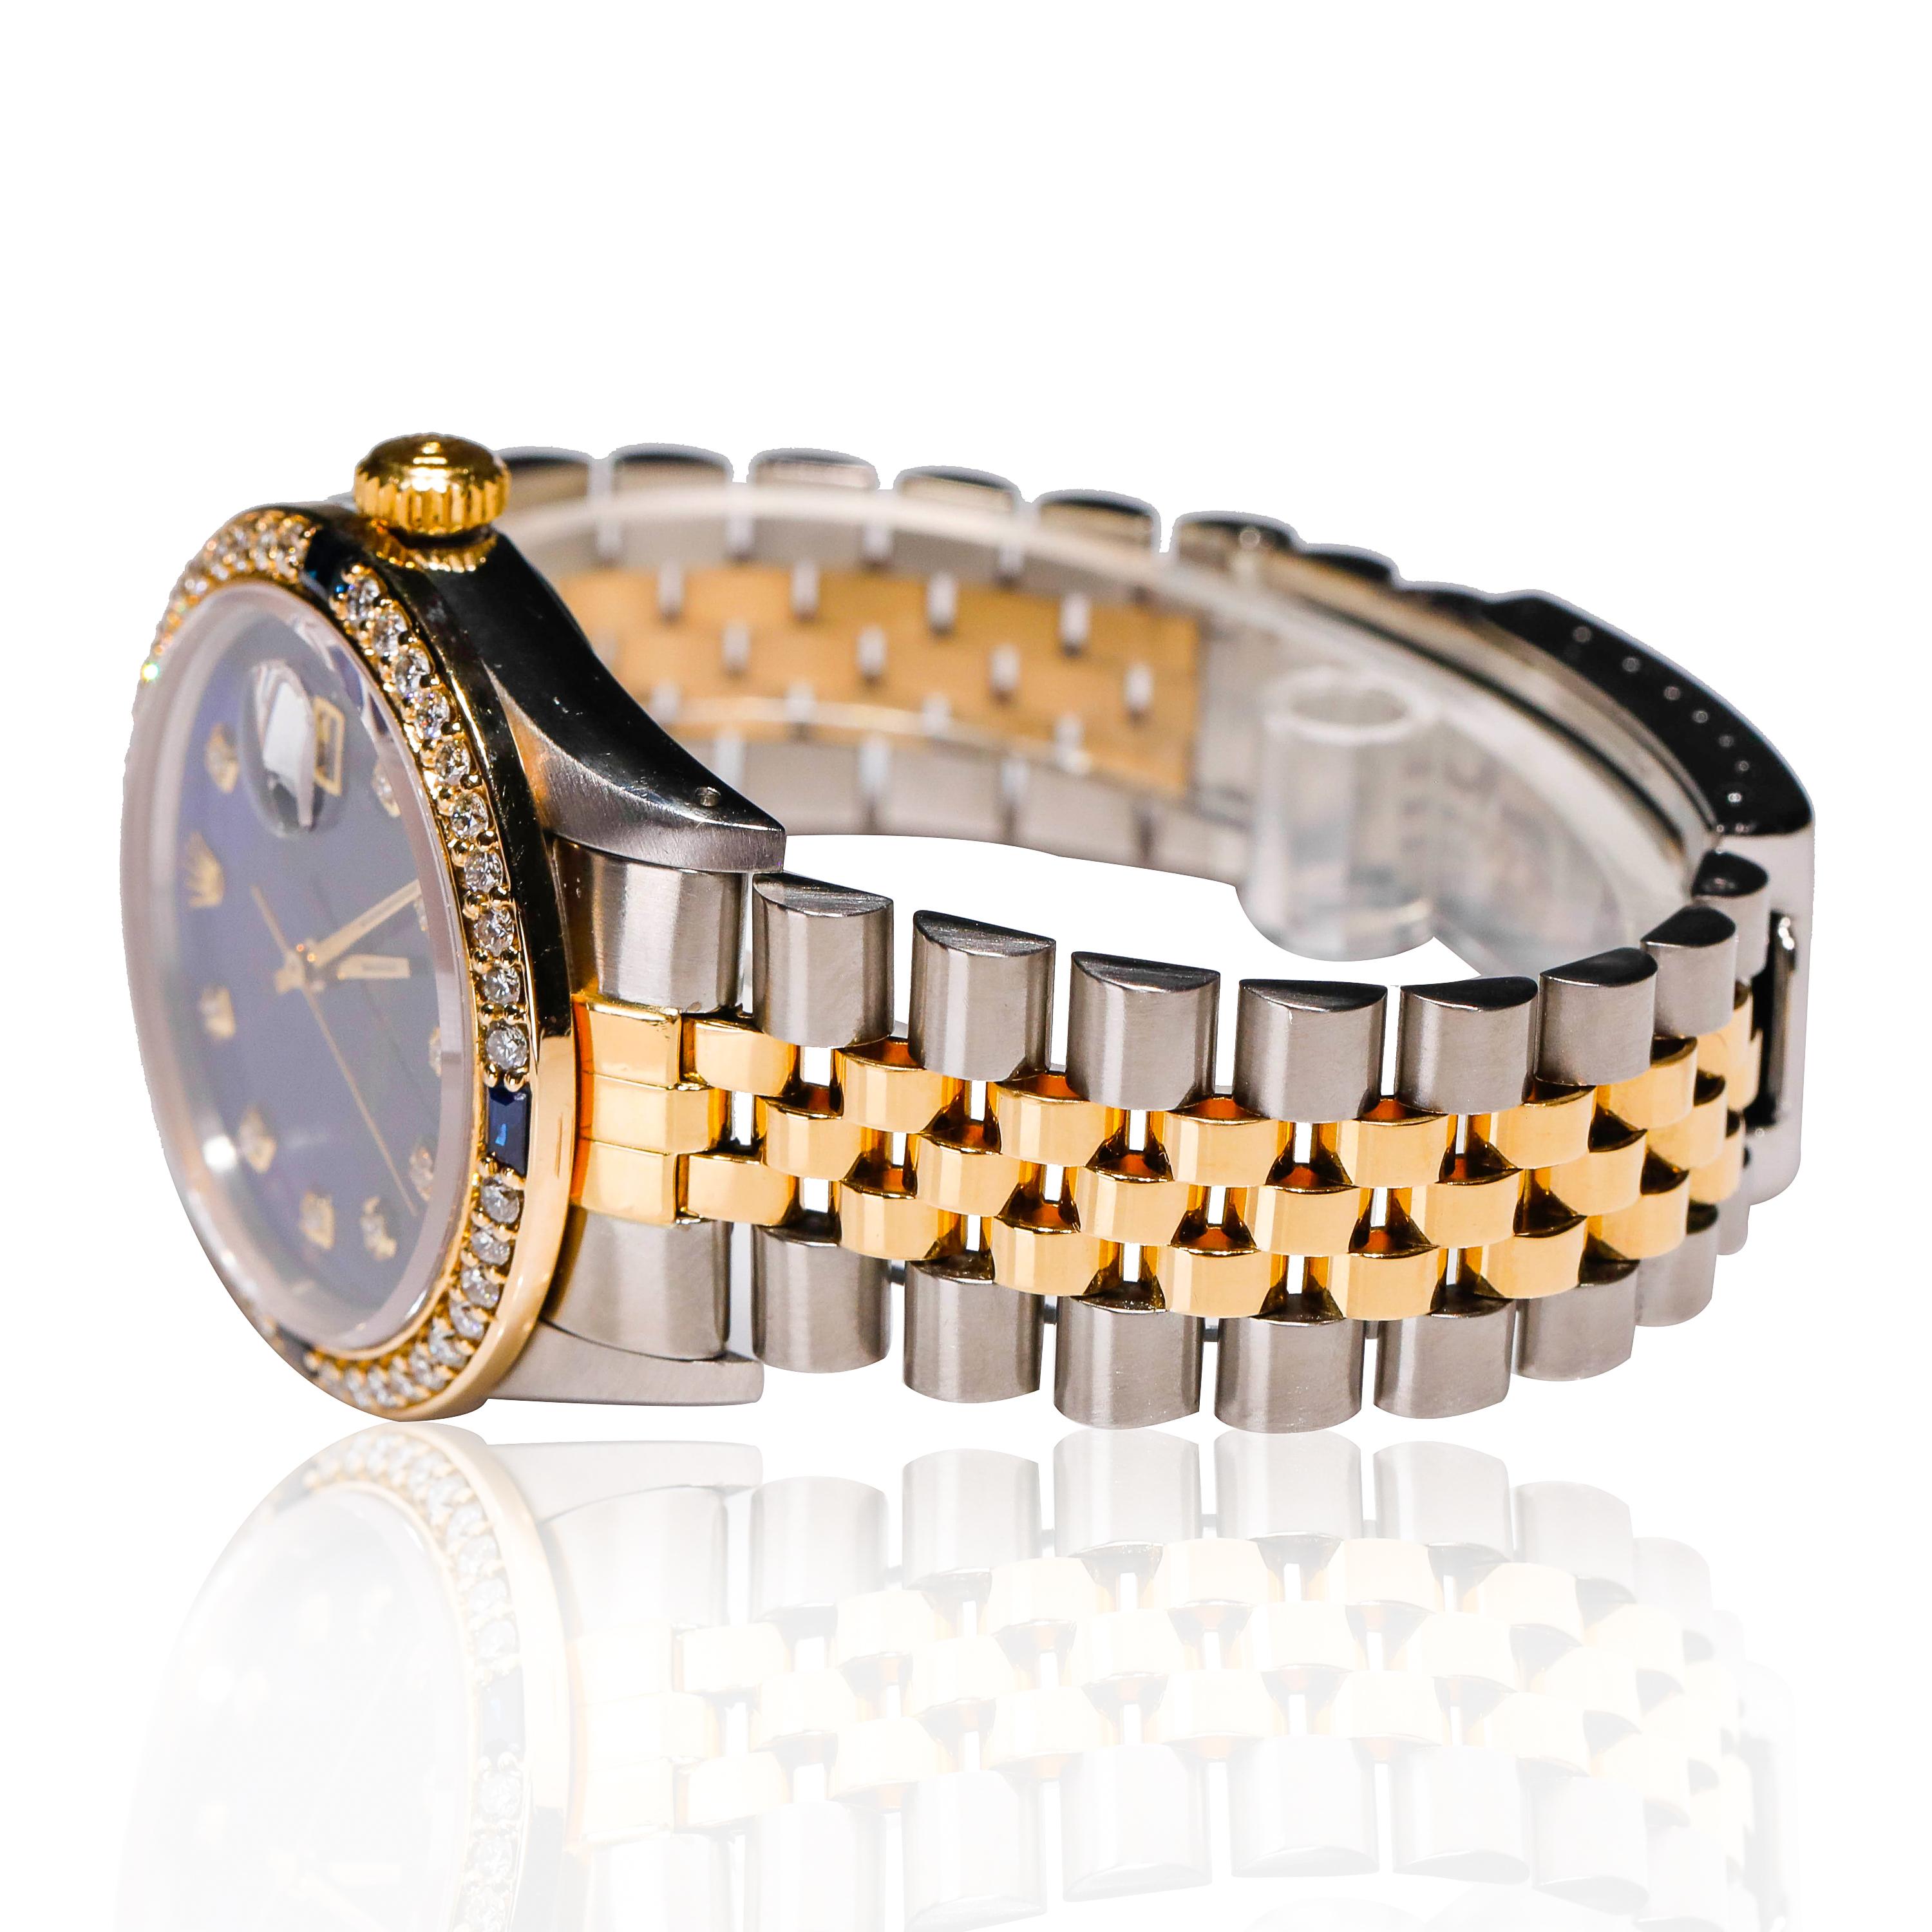 Rolex 2-Tone Datejust Mother of Pearl and Diamonds Automatic Dial 18 Karat Gold Watch

SKU: WA00013

PRIMARY DETAILS
Brand:  Rolex
Model: Rolex 2-Tone Datejust Mother of Pearl
Country of Origin: Switzerland
Movement Type: Automatic
Year of